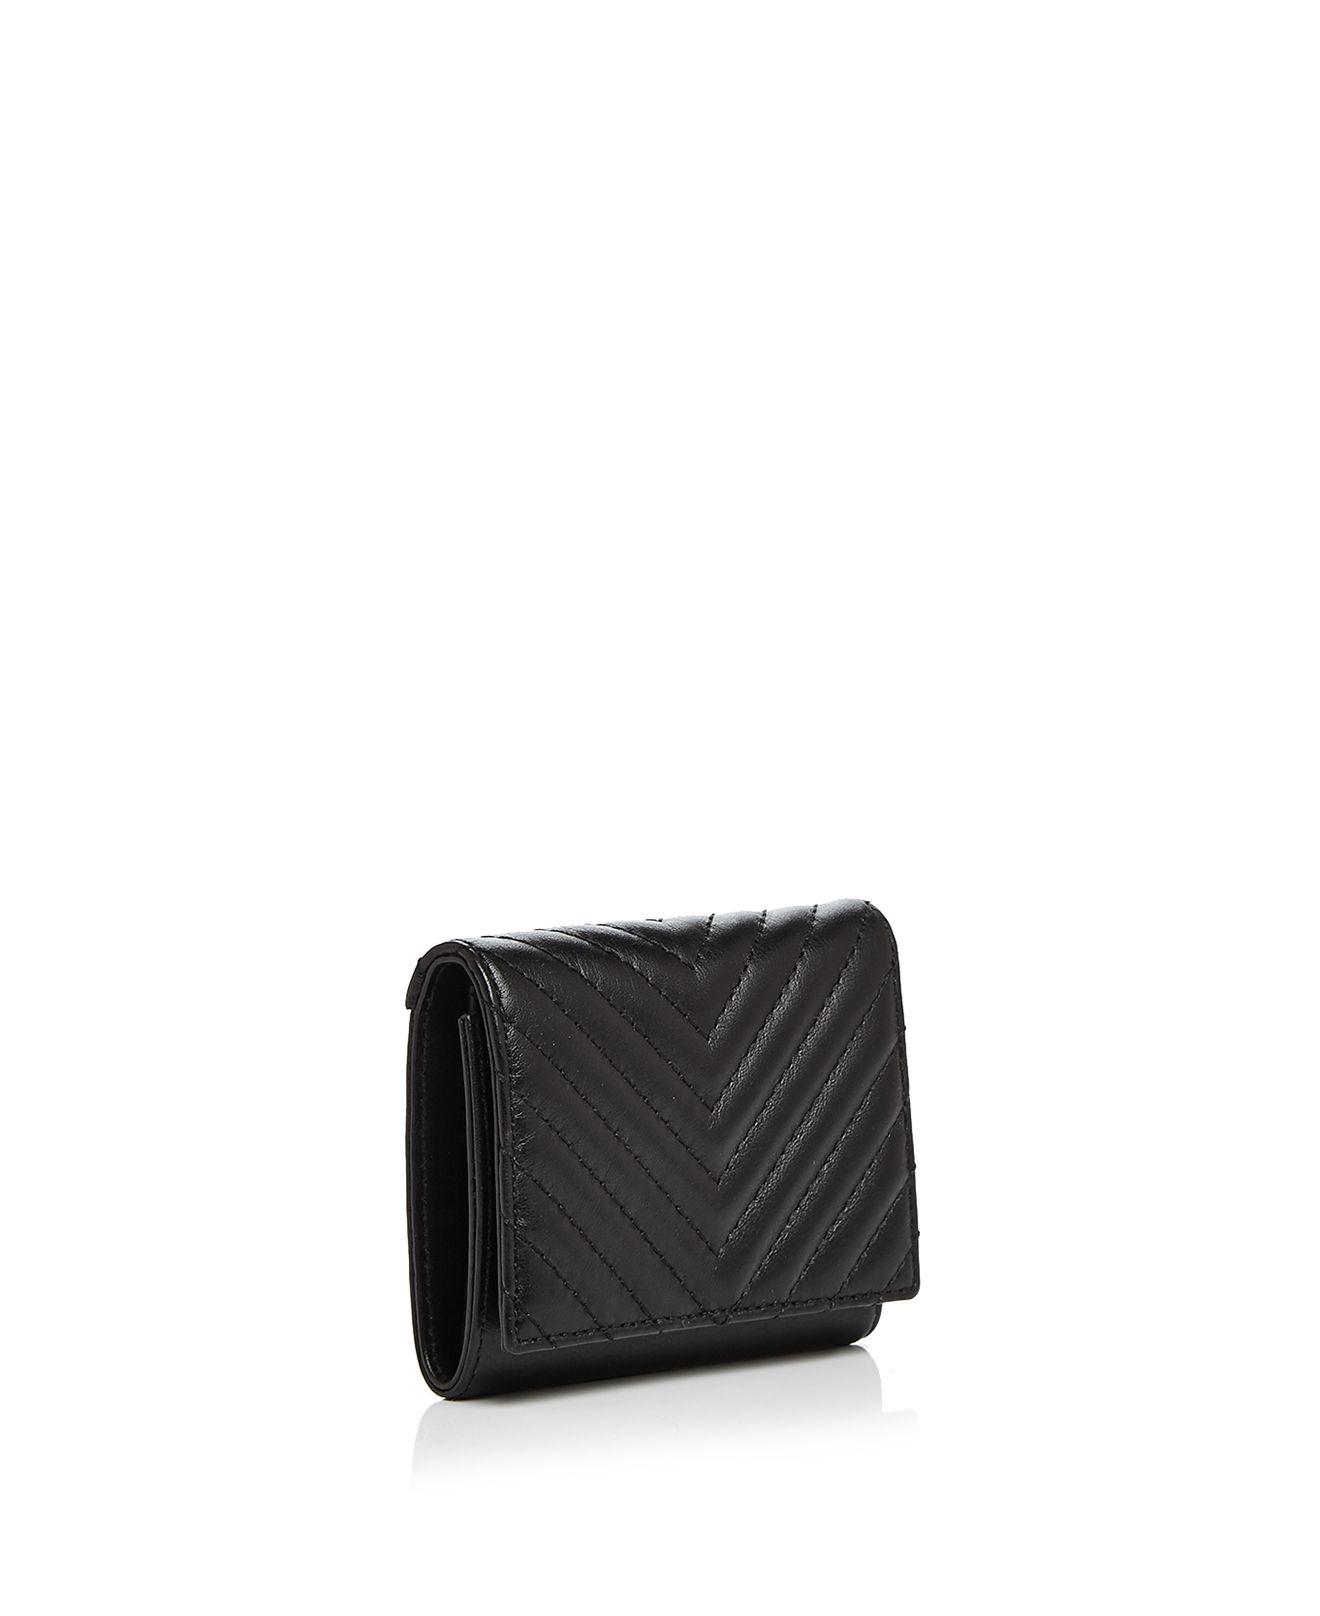 Rebecca Minkoff Love Quilted Leather Trifold Wallet in Black | Lyst